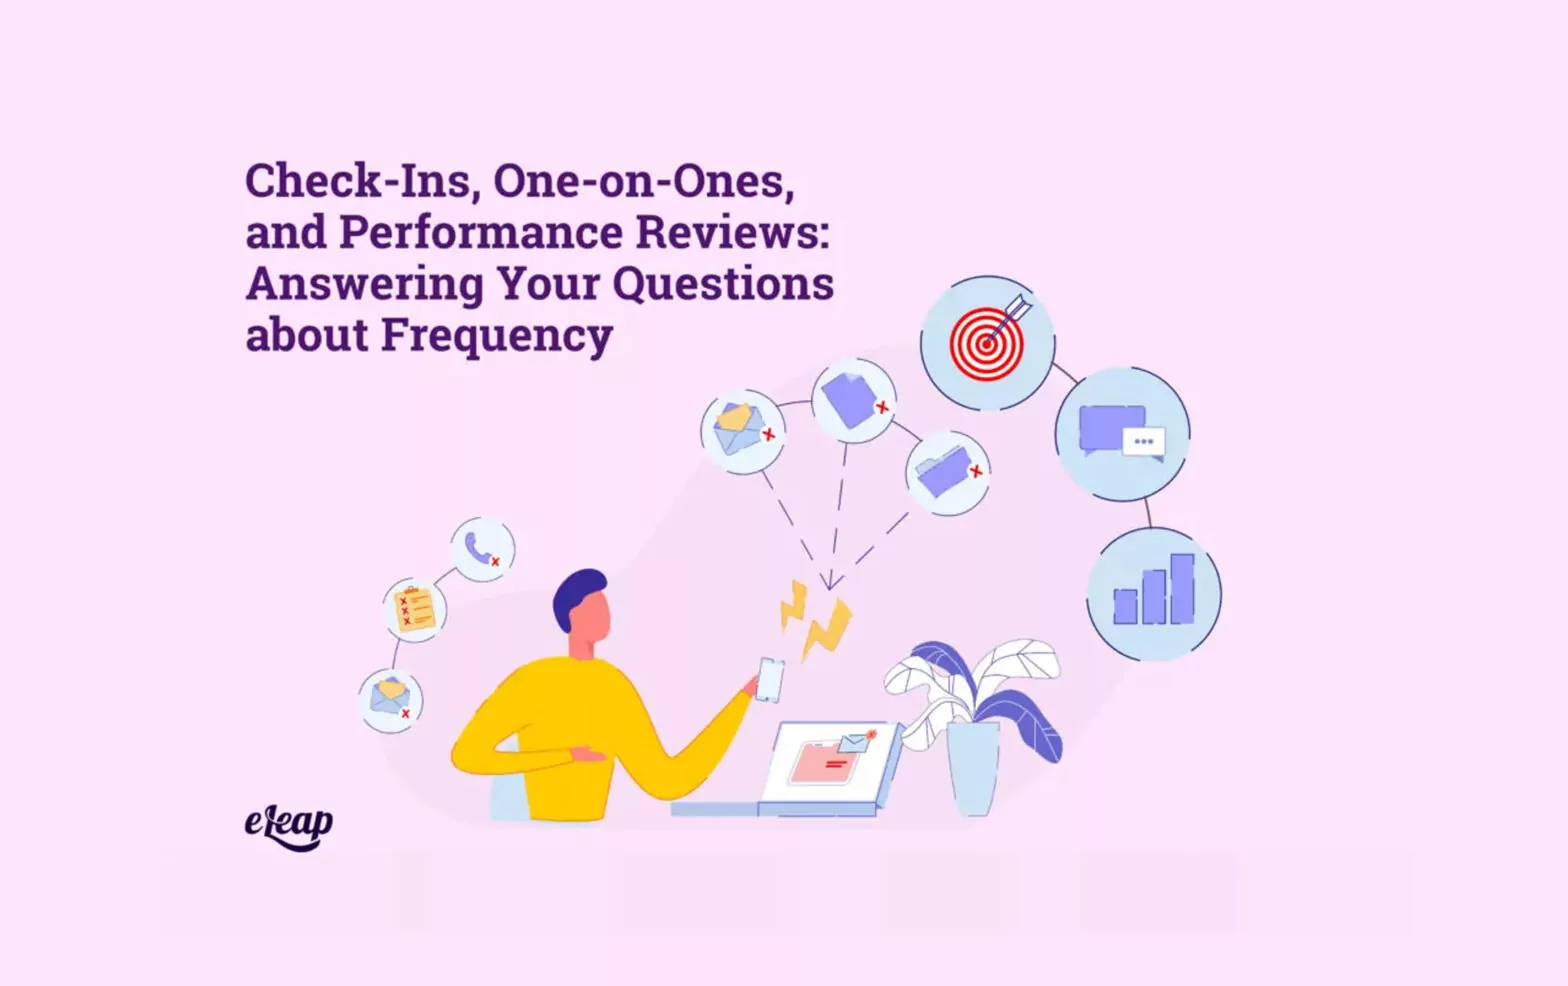 Check-Ins, One-on-Ones, and Performance Reviews: Answering Your Questions about Frequency